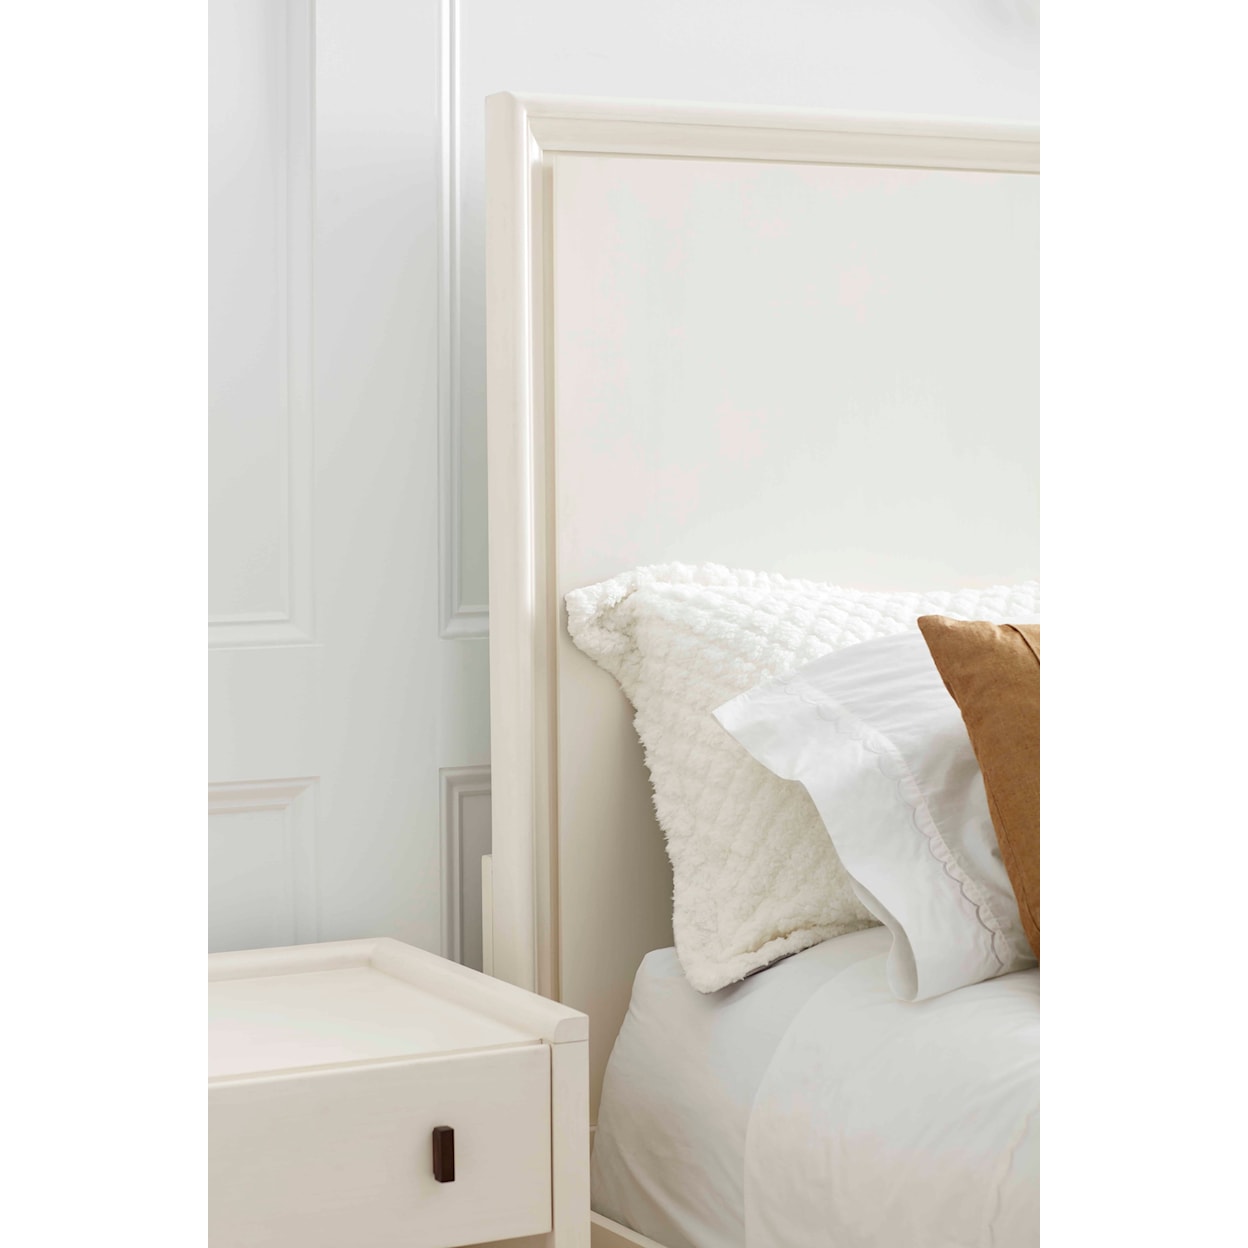 A.R.T. Furniture Inc Blanc Queen Panel Bed